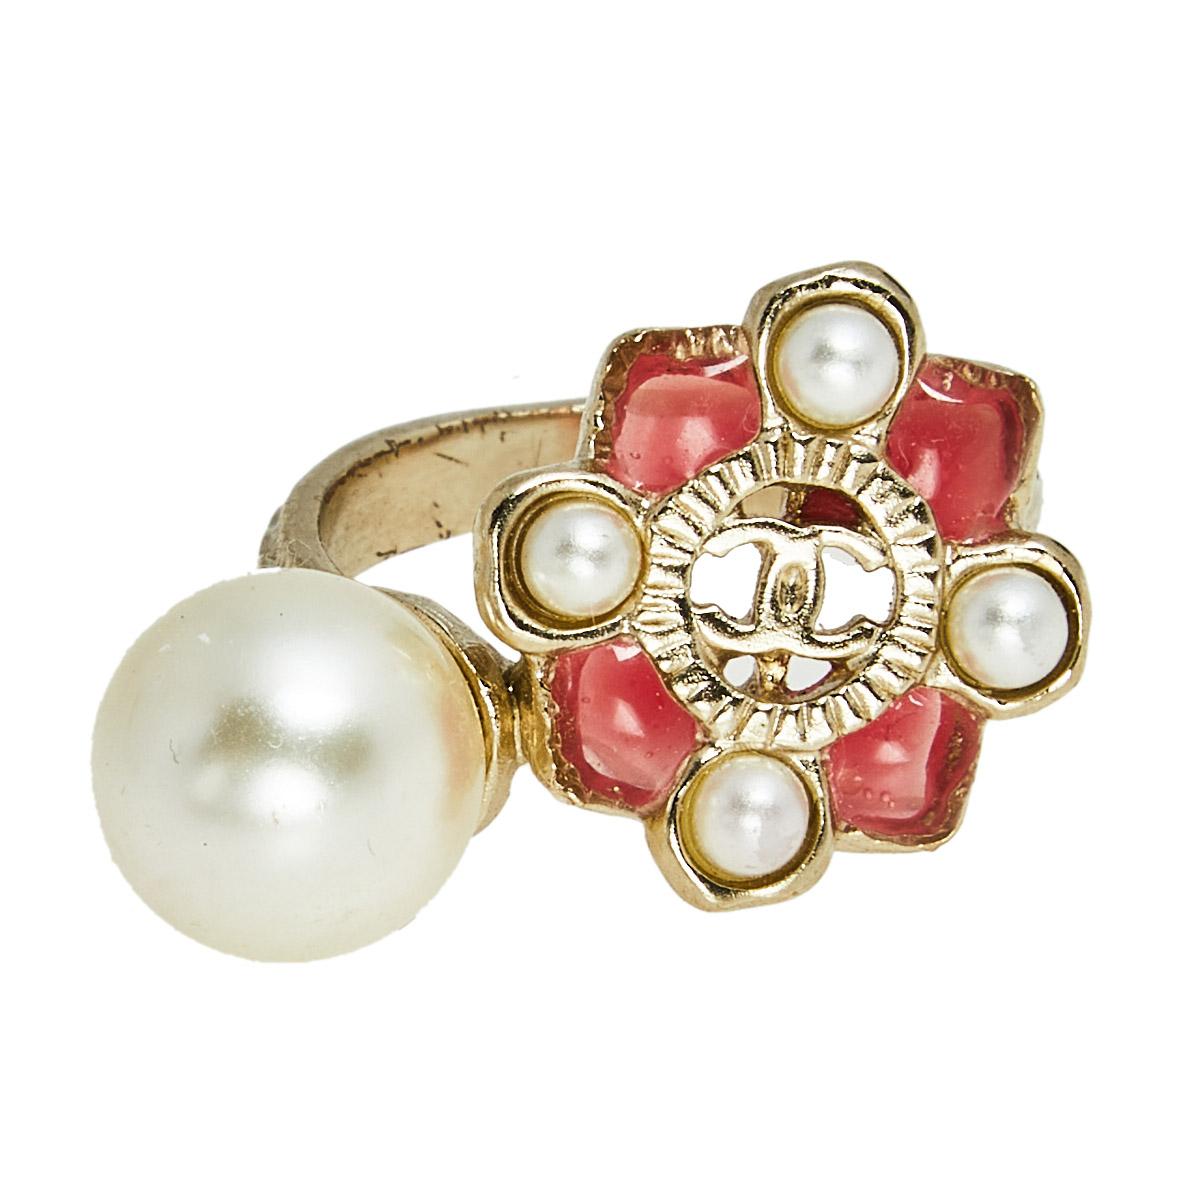 Chanel's cocktail ring brings a statement size and look. It is made of gold-tone metal and the front is adorned with resin, pearls, and the CC logo. Wear it solo for an evening look.